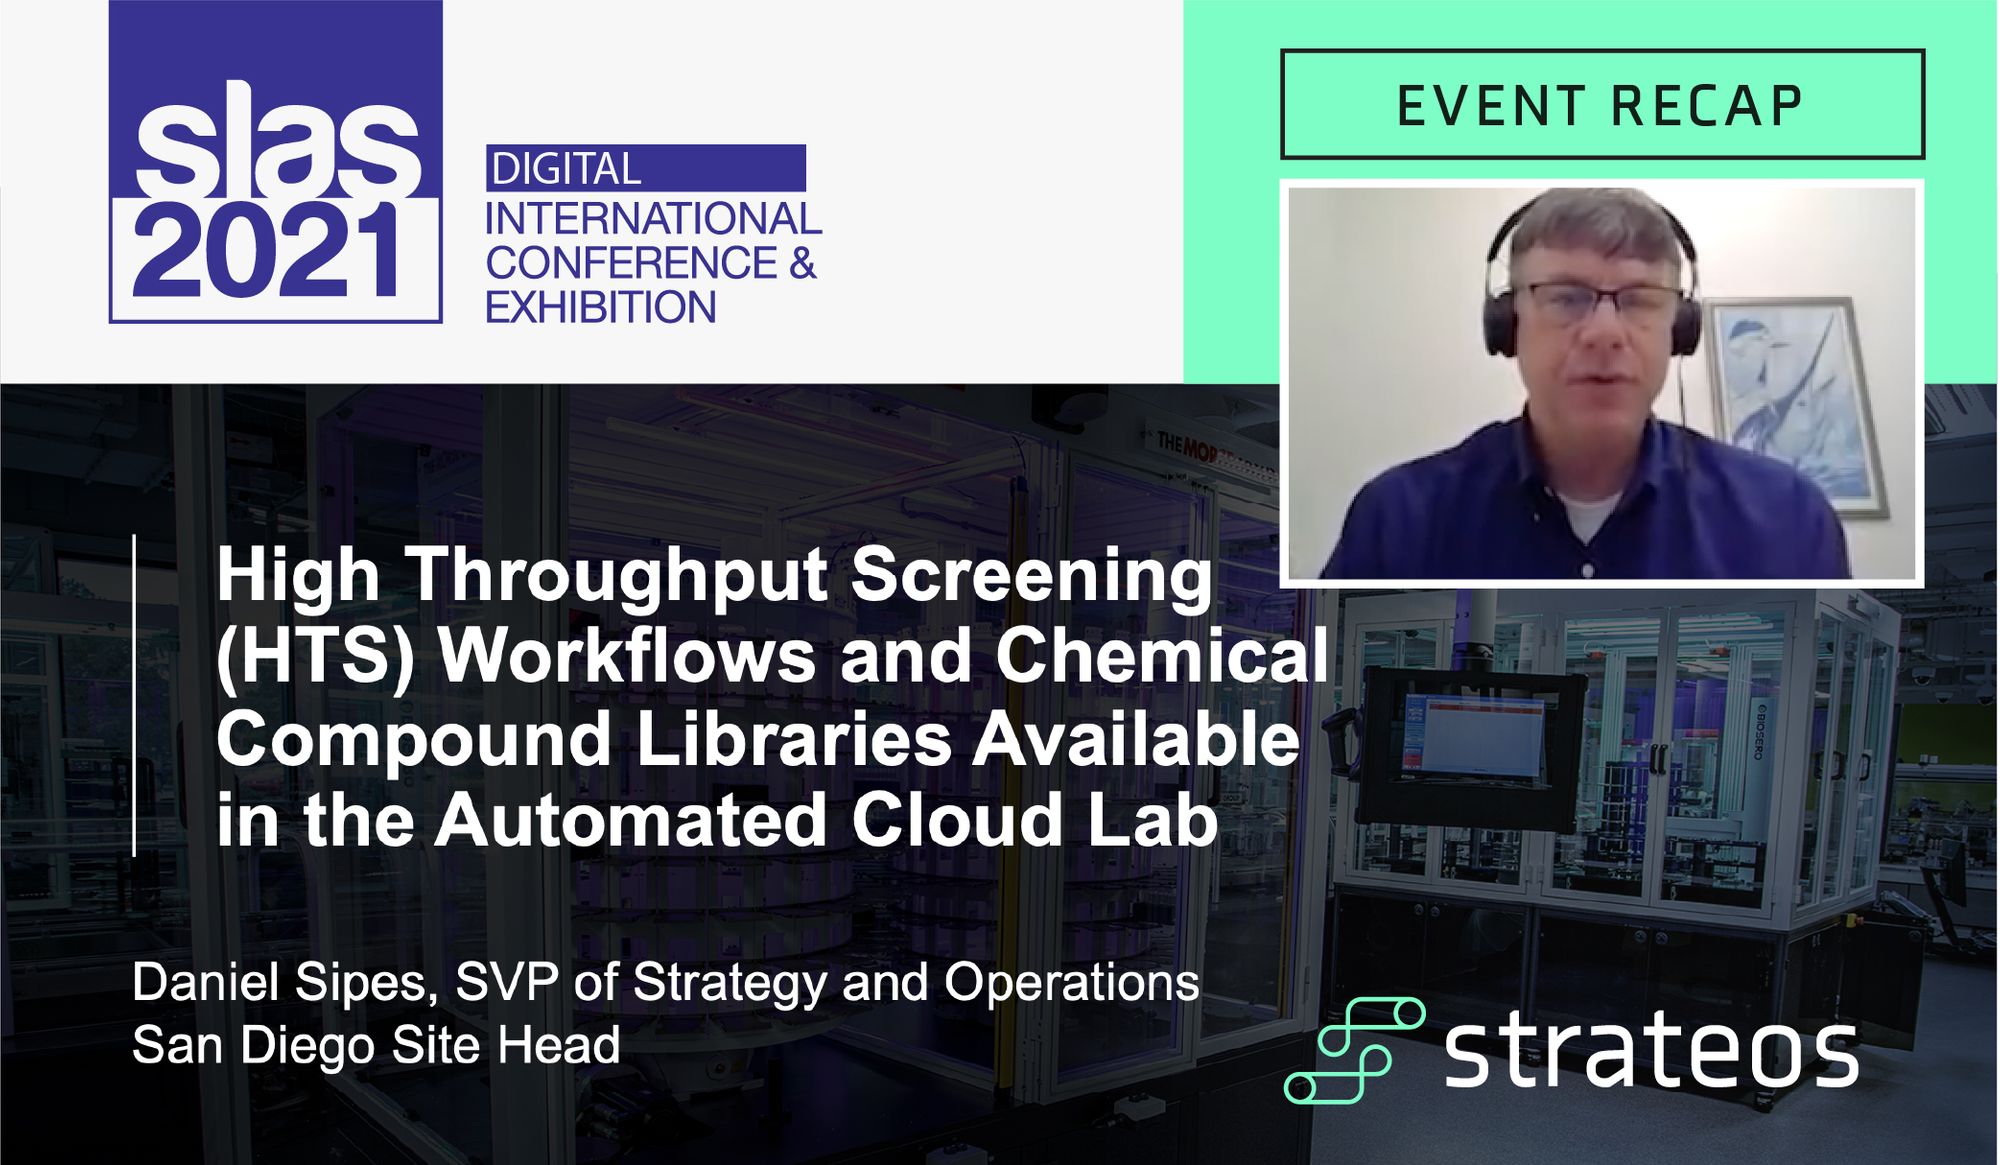 SLAS2021 HTS Workflows and Chemical Compound Libraries Available in the Automated Cloud Lab - Event Recap